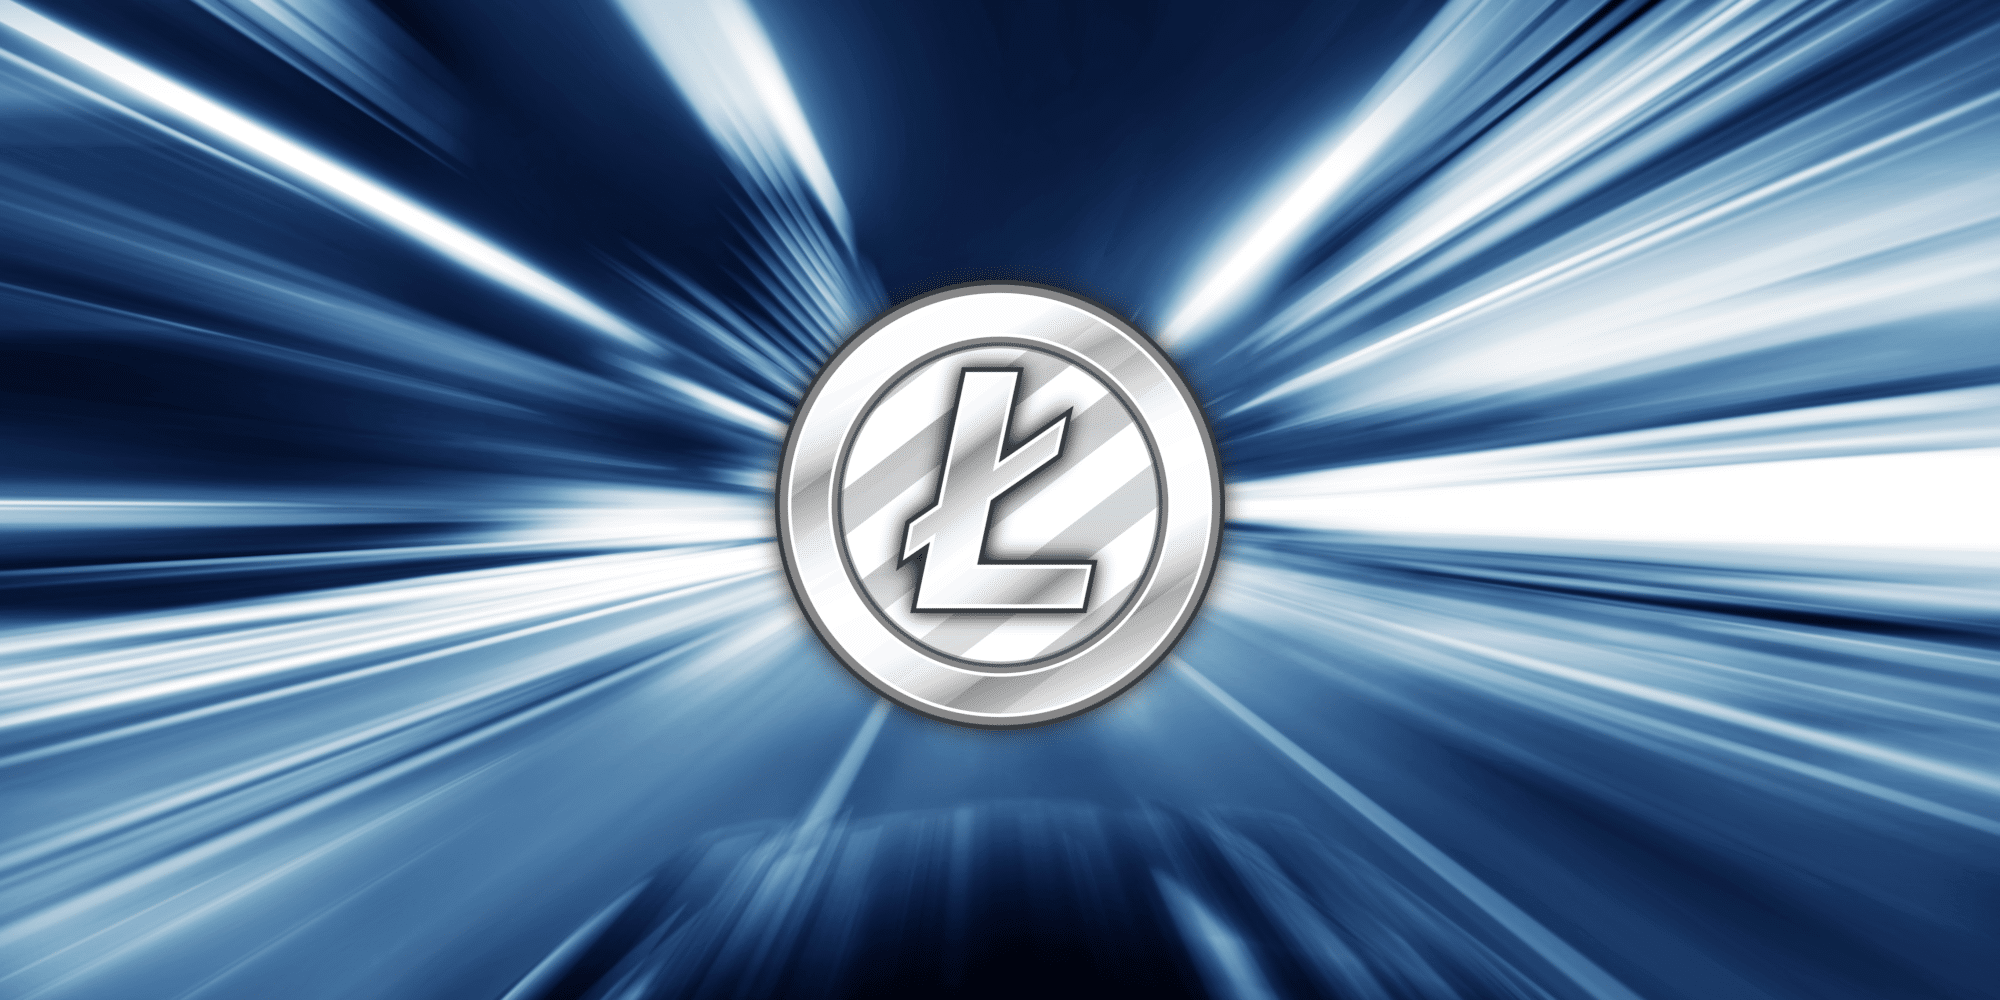 What Is Litecoin (LTC)? | The Silver to Bitcoin's Gold - CoinCentral